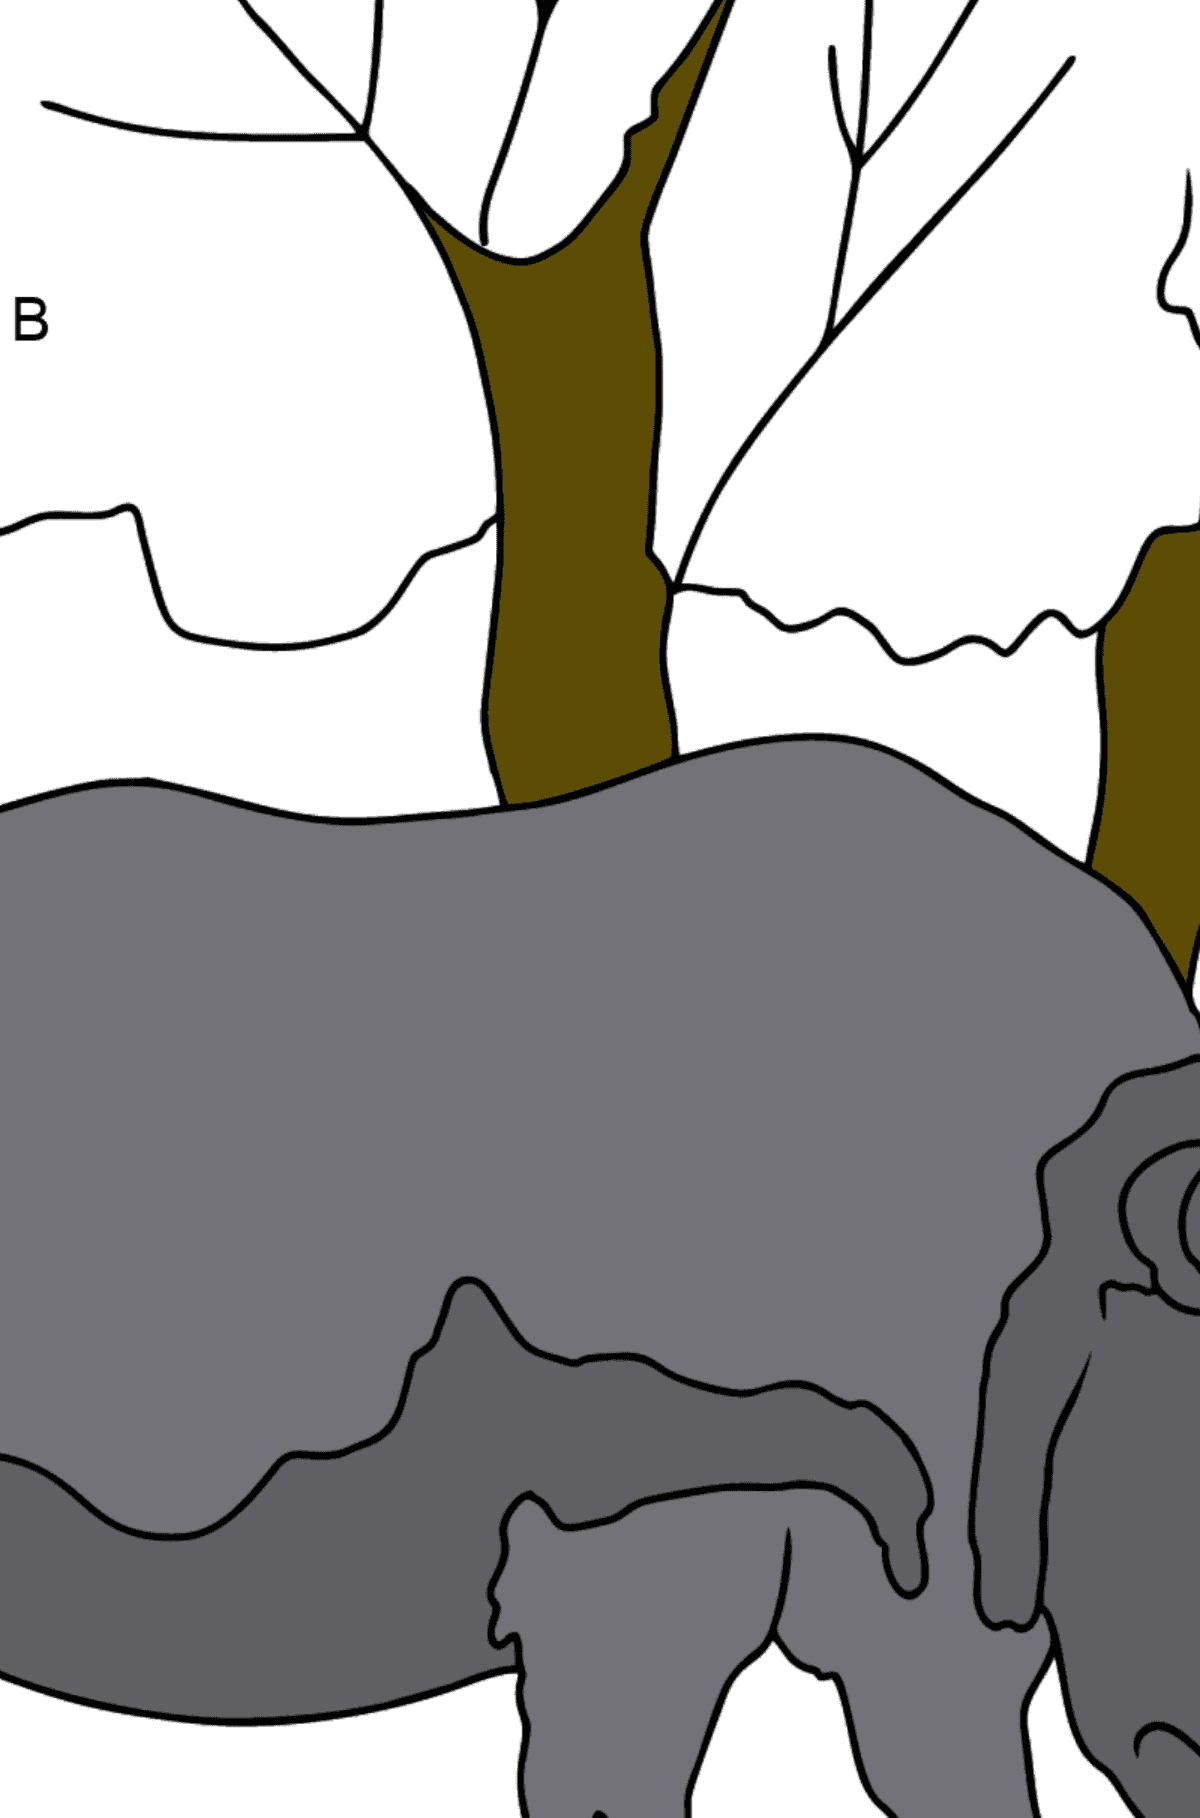 Coloring Page - A Rhino is Eating Grass - Coloring by Letters for Kids